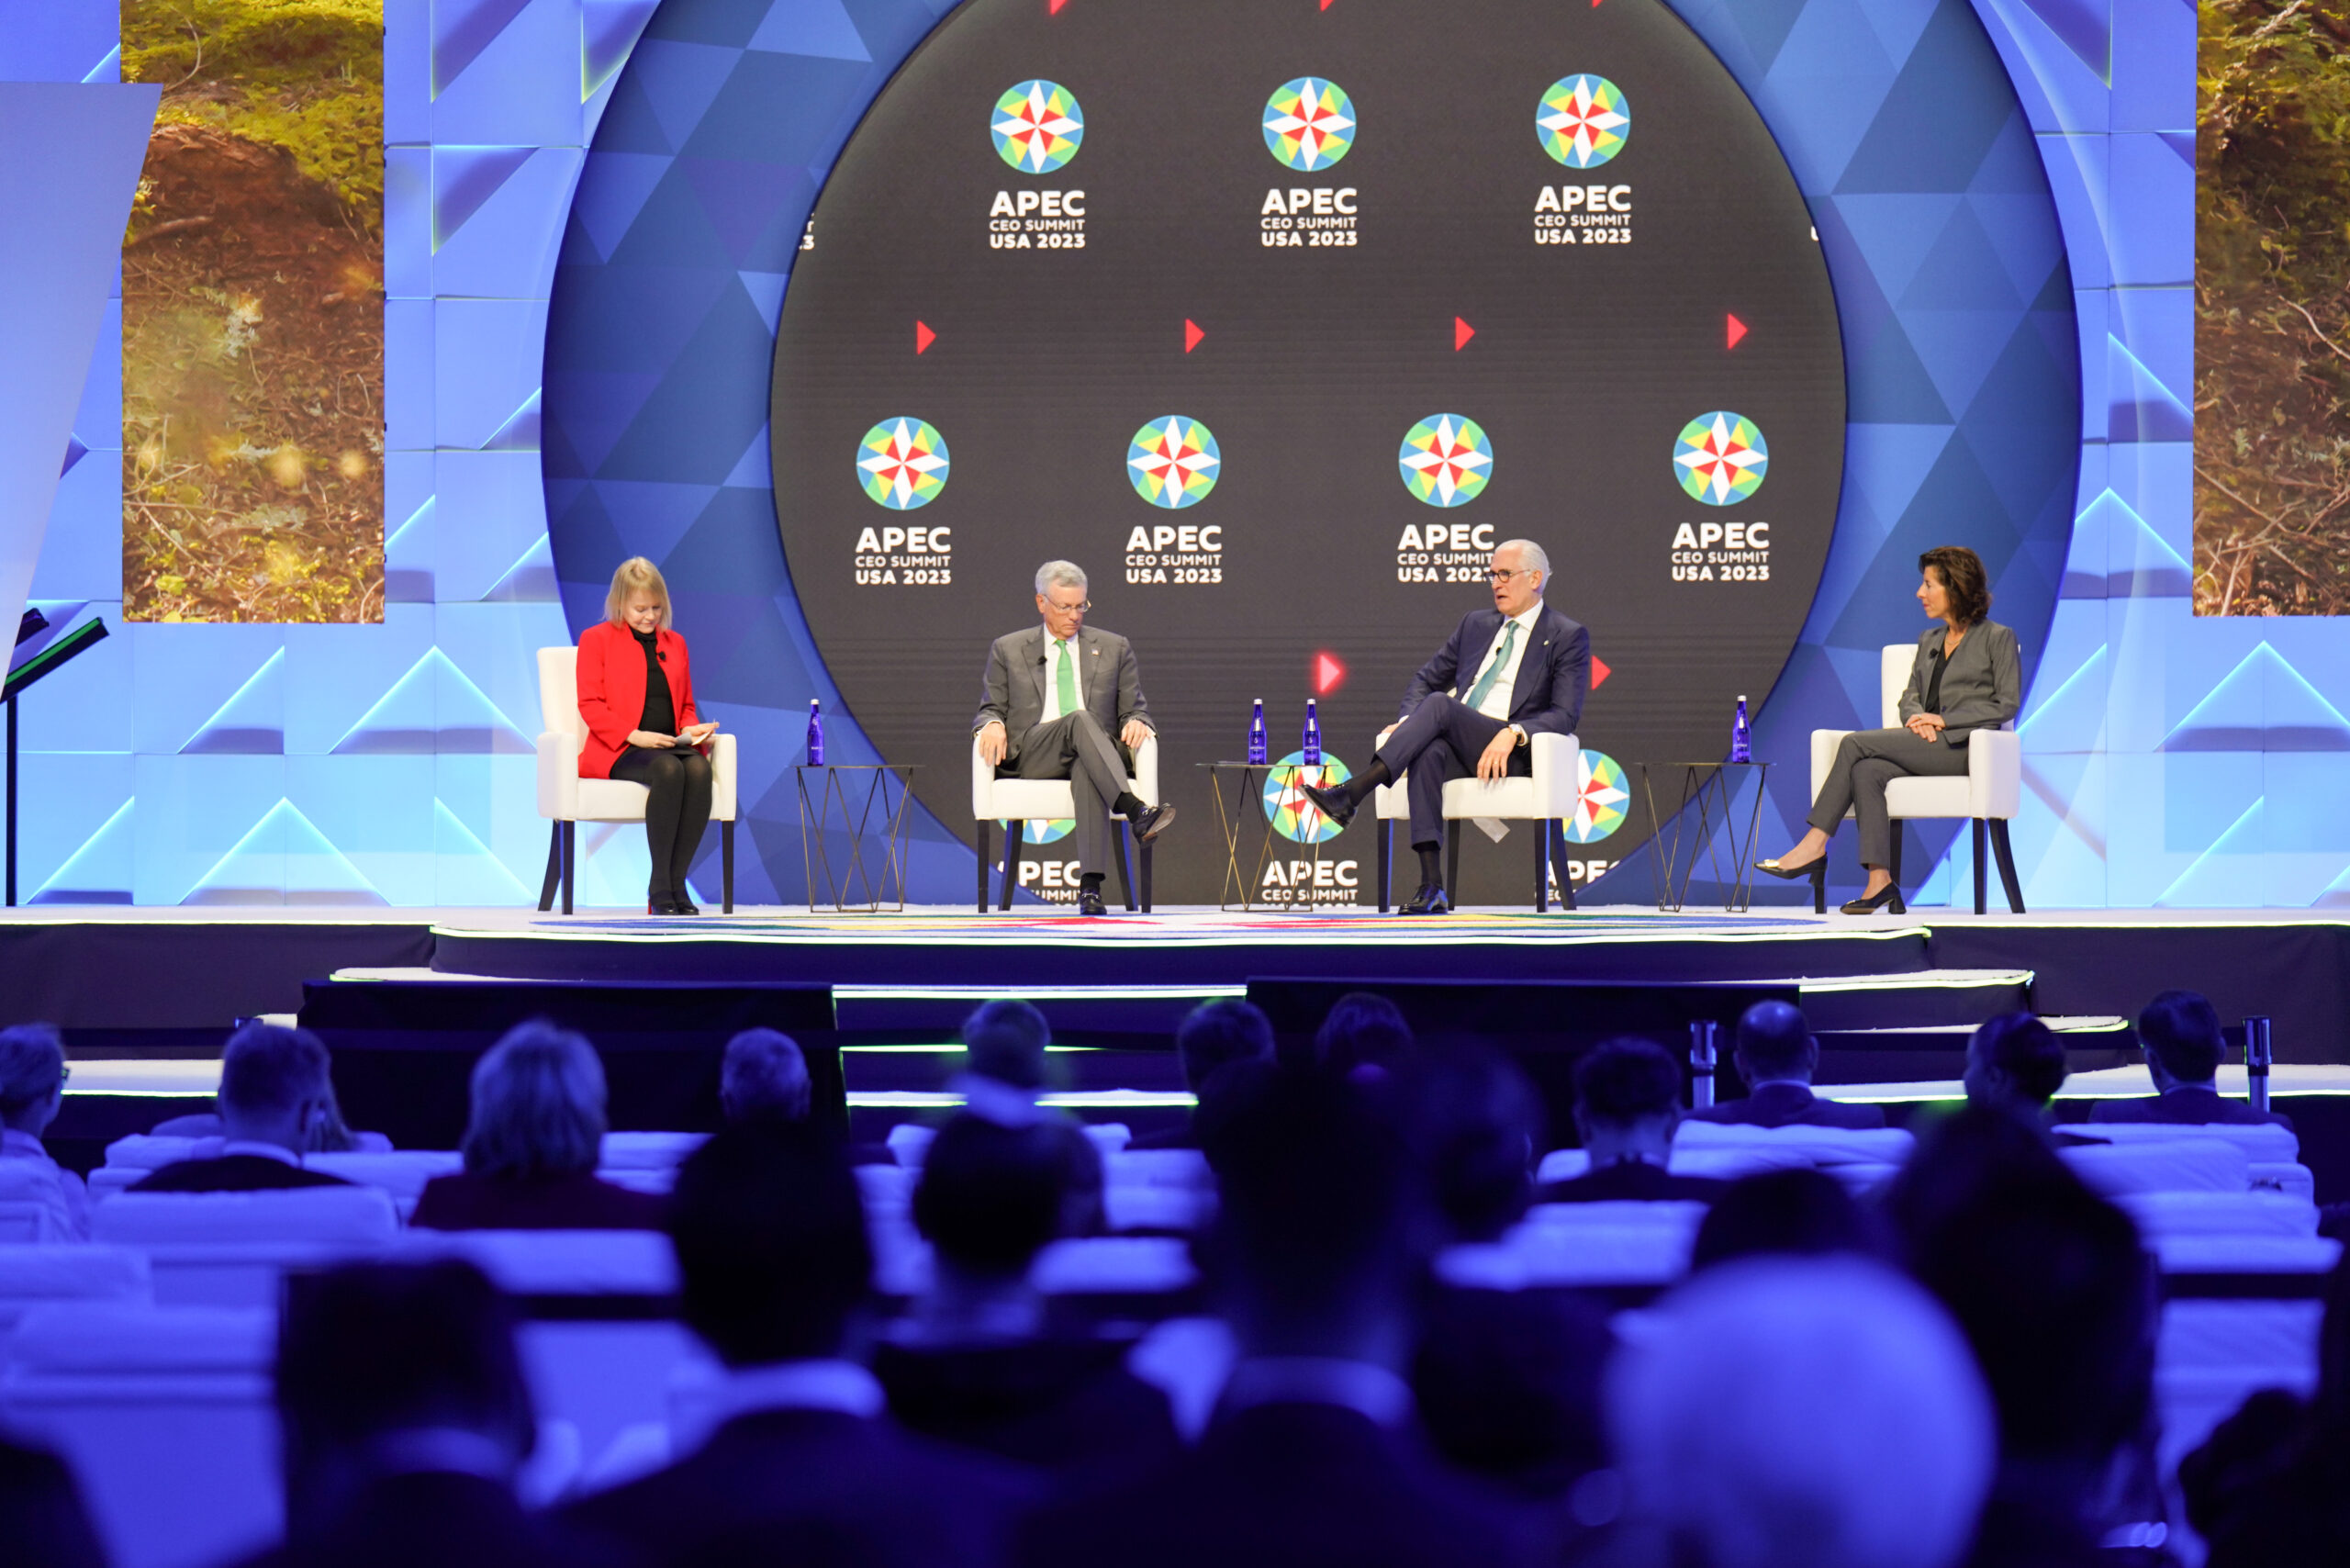 "Shaping the Economic Future: Highlights from the APEC CEO Summit with The Research University